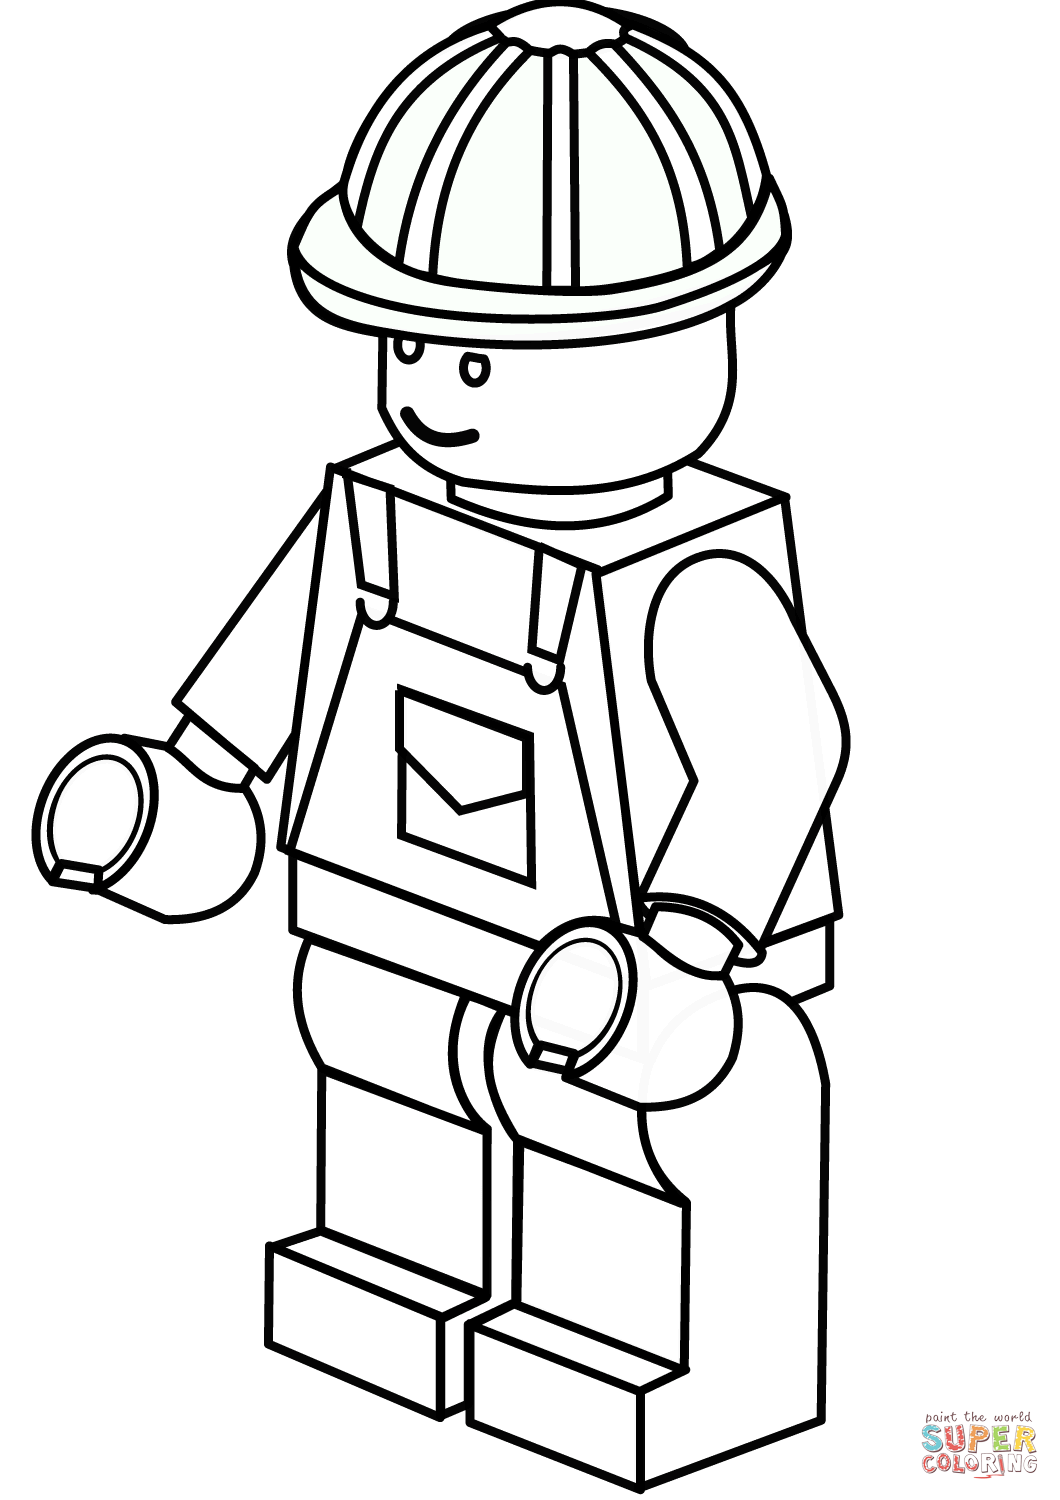 Lego Construction Worker coloring page | Free Printable Coloring Pages